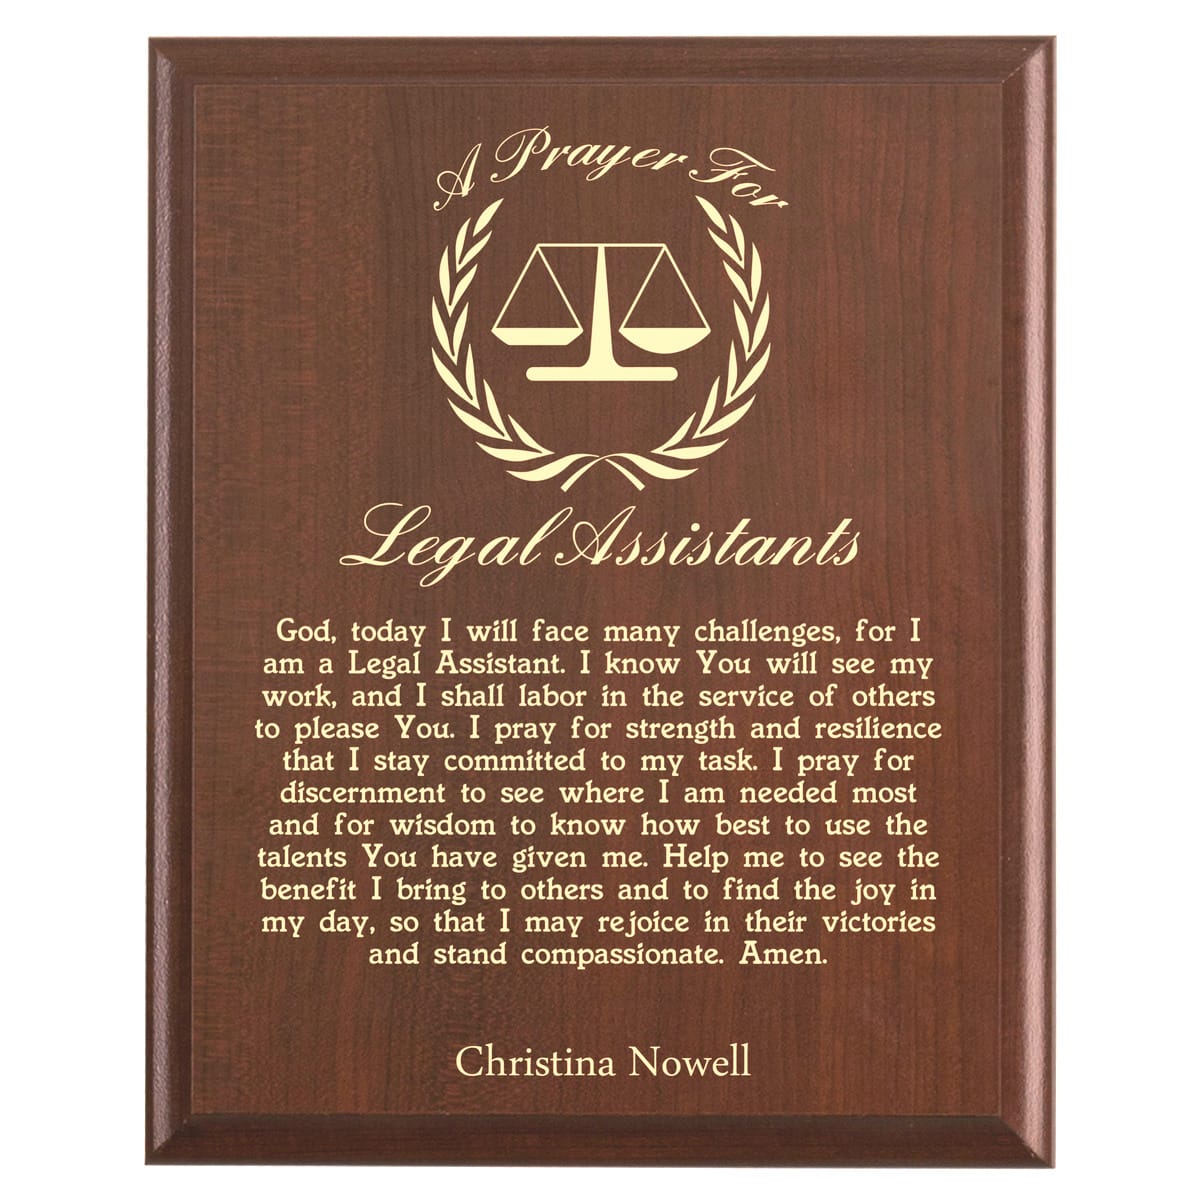 Plaque photo: Legal Assistant Prayer Plaque design with free personalization. Wood style finish with customized text.